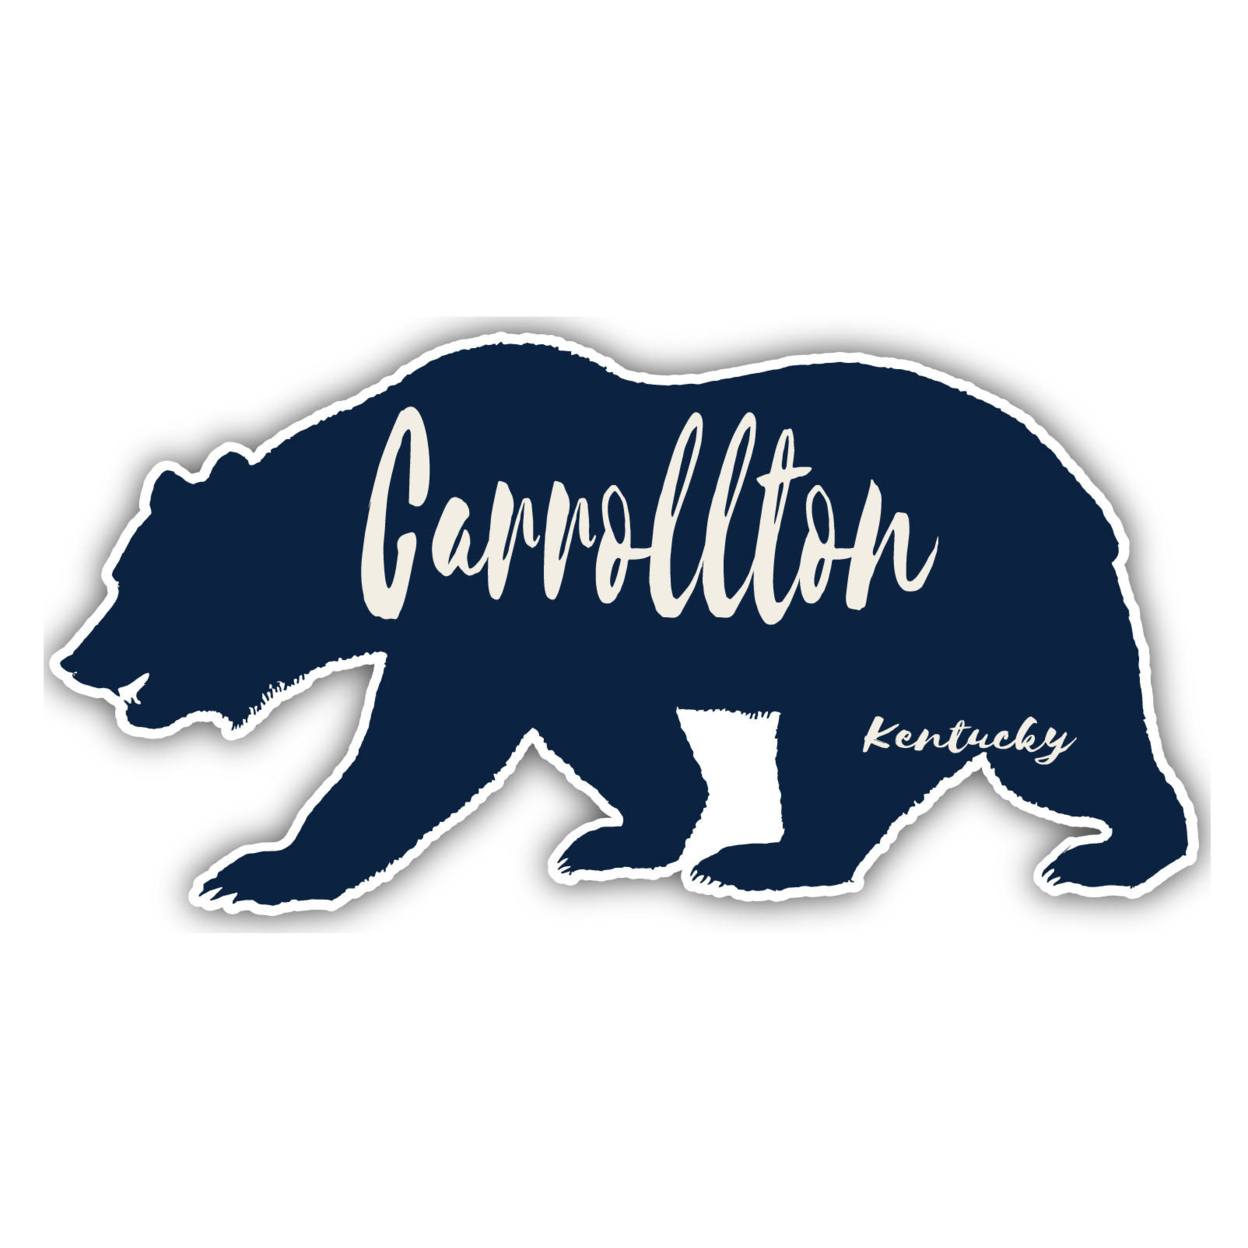 Carrollton Kentucky Souvenir Decorative Stickers (Choose Theme And Size) - 4-Pack, 8-Inch, Great Outdoors